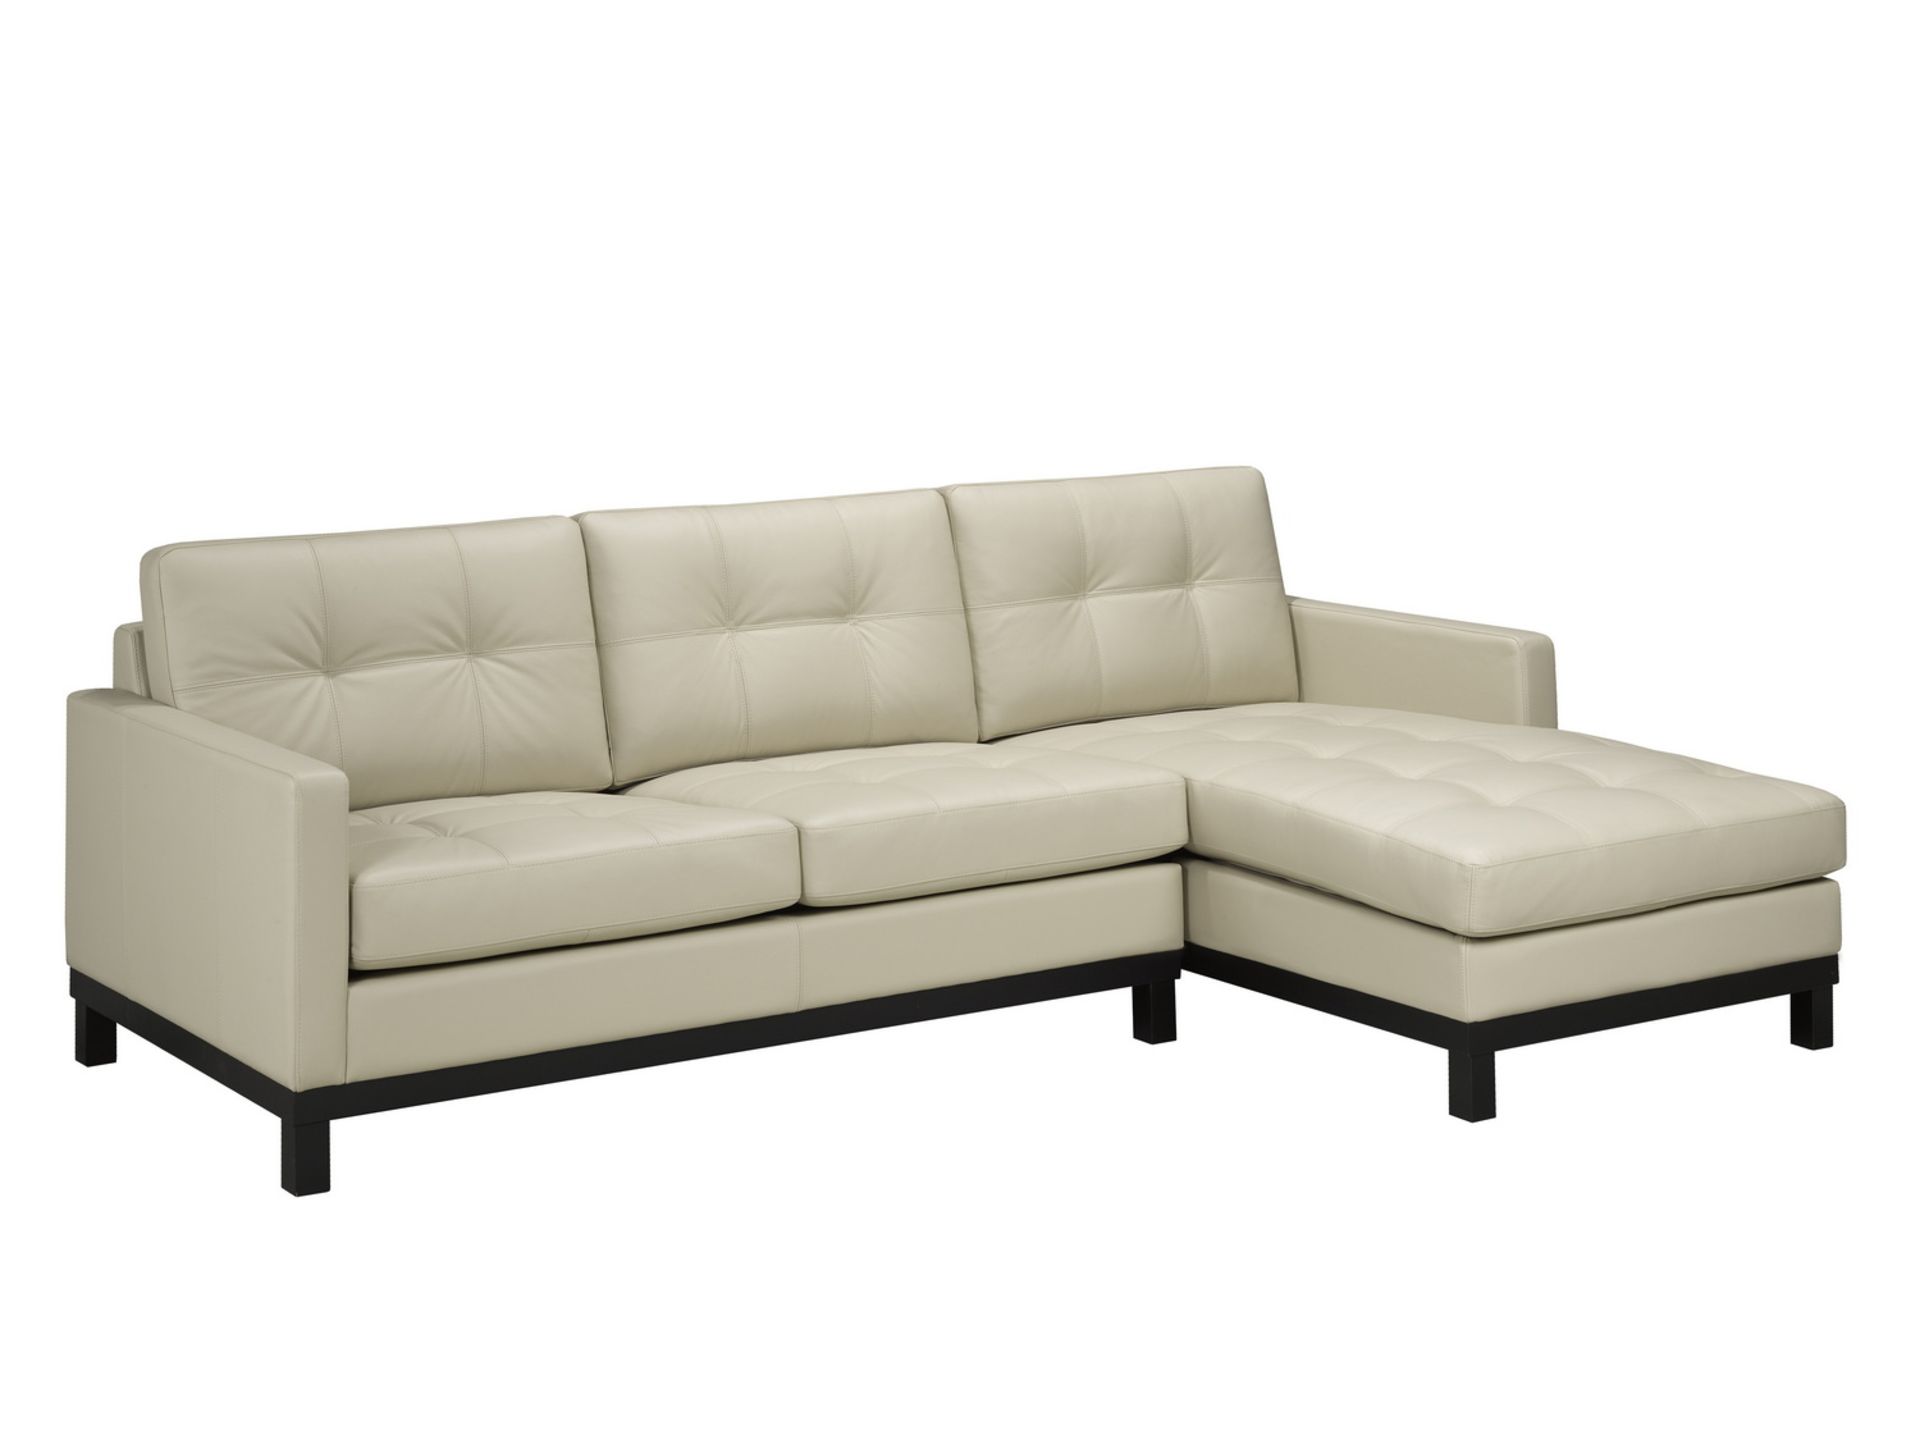 VENICE STONE 100% GENUINE LEATHER 2-PIECE CHAISE SECTIONAL SOFA (94" X 60") (#287) (CANADIAN MADE)